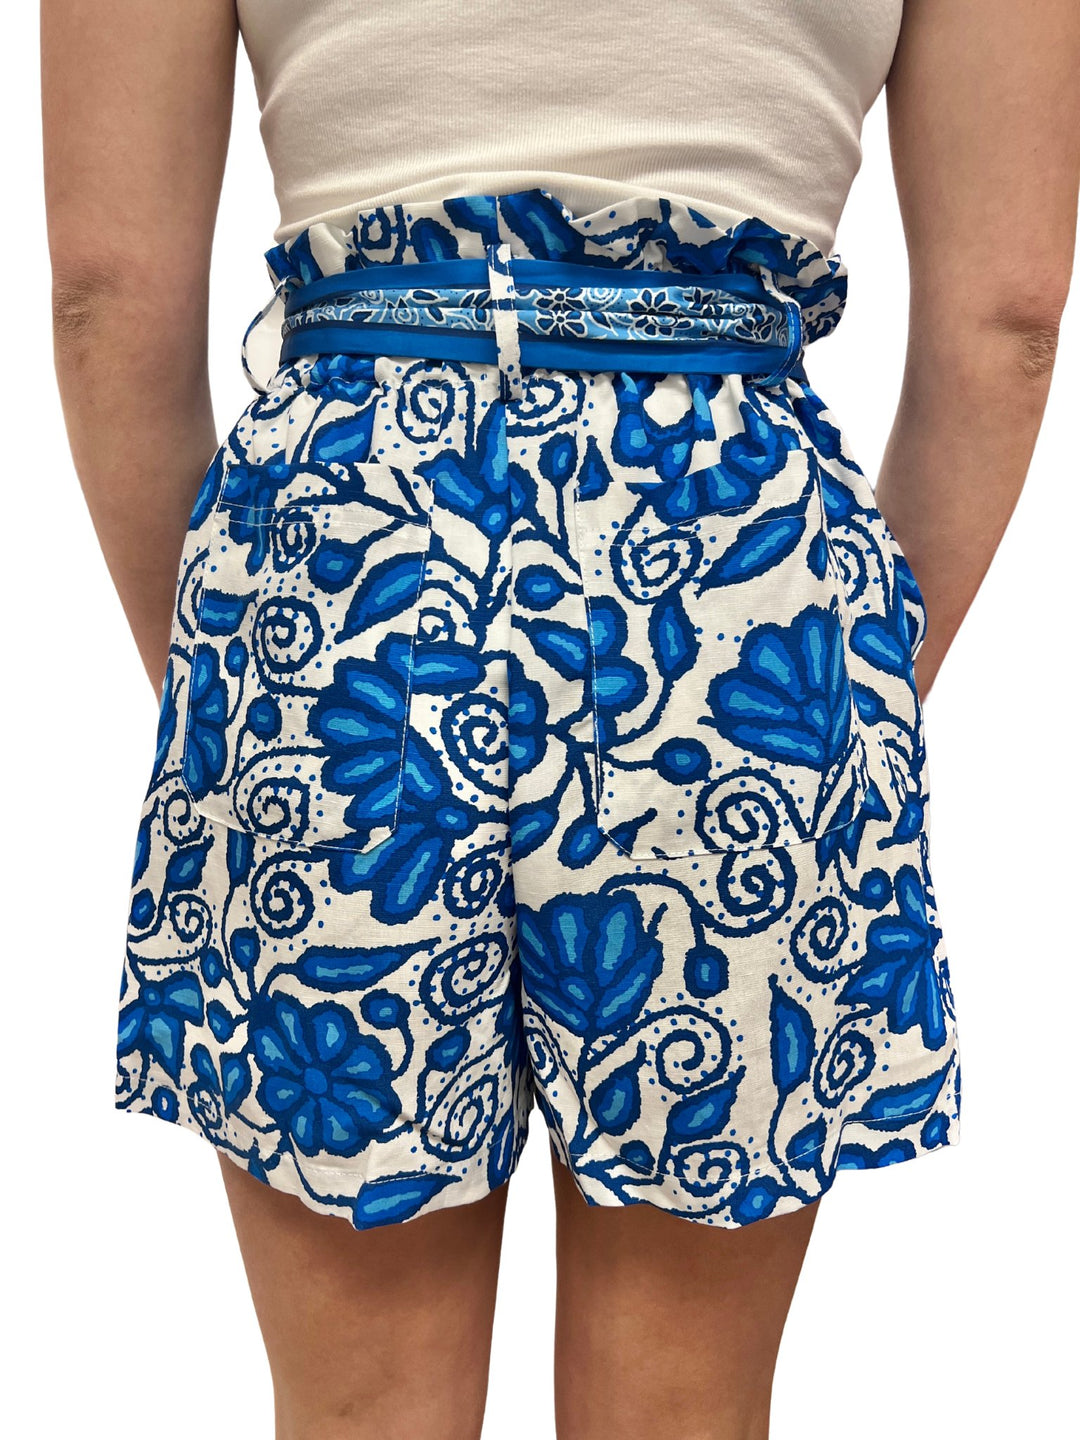 Current Air Printed Shorts - Capri by Sunset & Co.